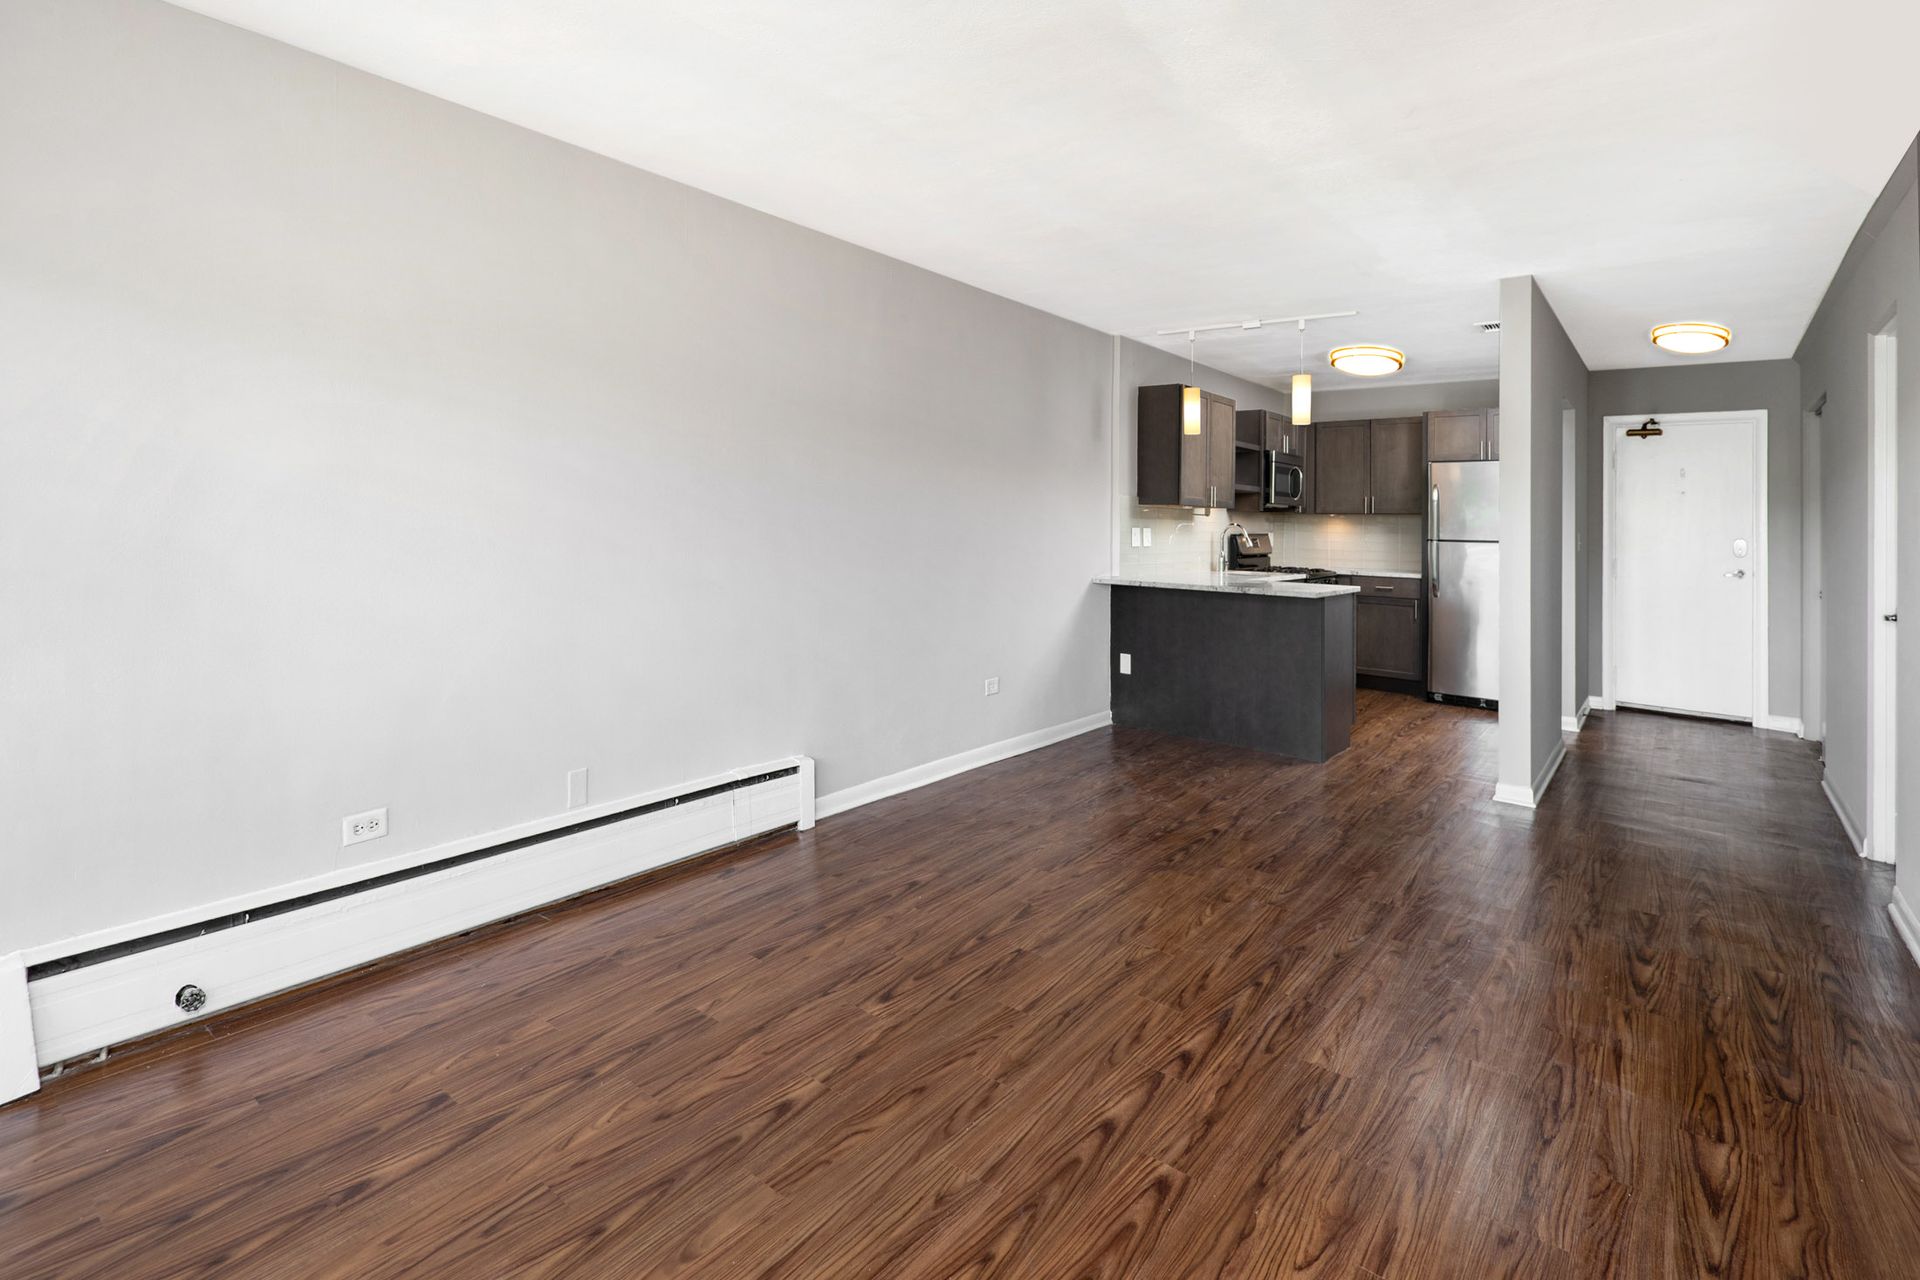 An empty living room with hardwood floors and a kitchen in the background at Reside on North Park.